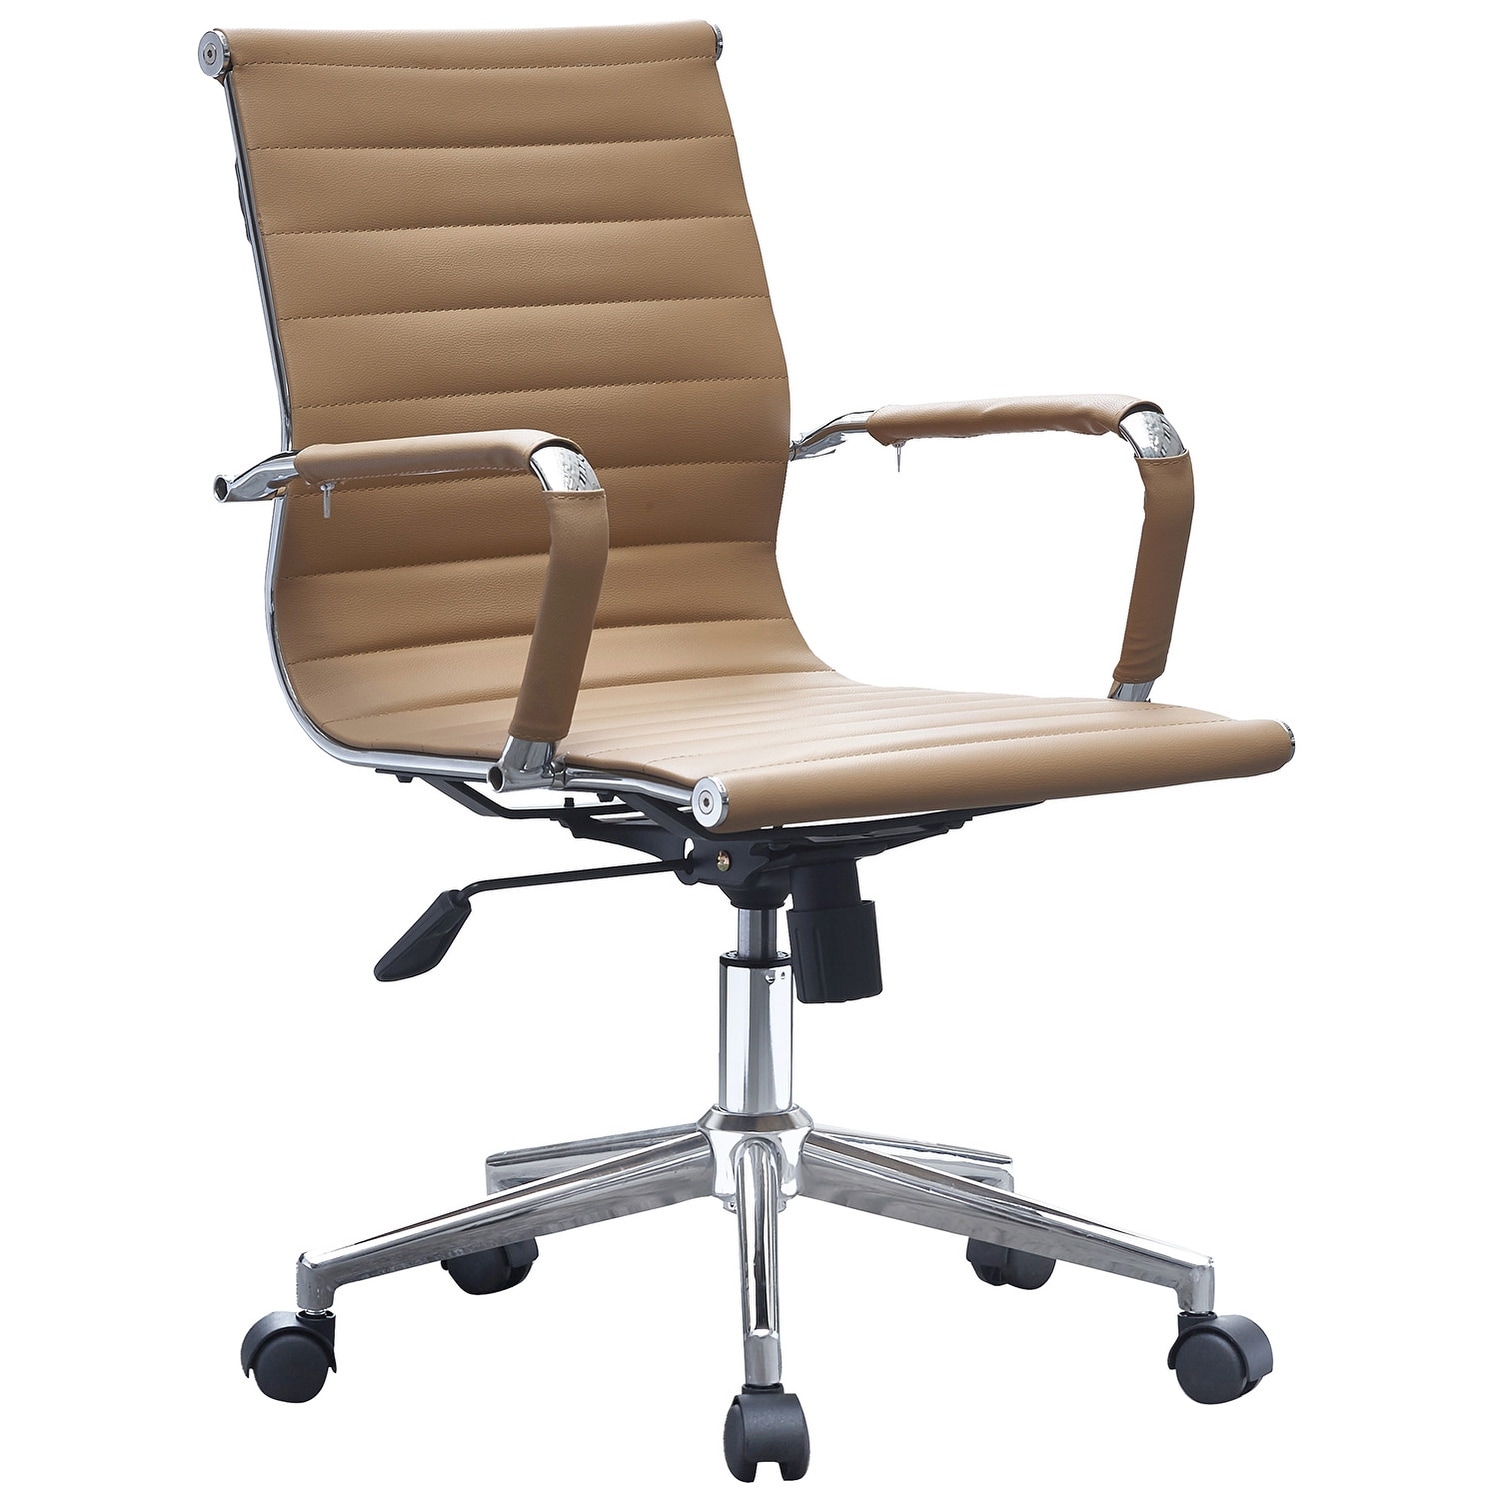 https://ak1.ostkcdn.com/images/products/is/images/direct/3b340e4d5bca51e7c6127c3be426f0bb44b4f998/Office-Chair-Mid-Back-Tan-Ergonomic-Adjustable-Height-Swivel-With-Padded-Arms-Wheels-Work-Executive-Task.jpg